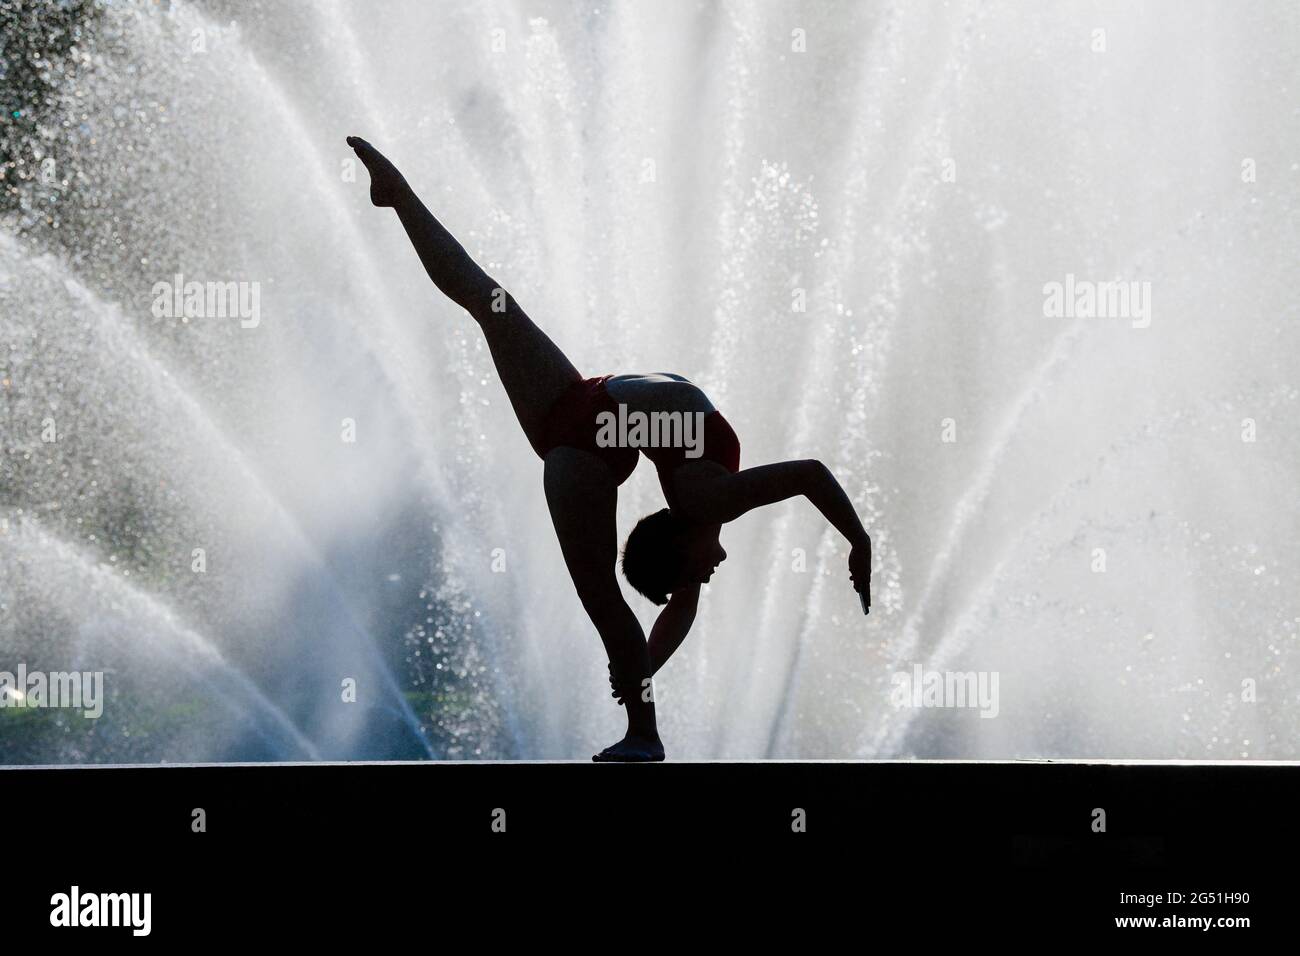 Woman doing acrobatic pose against fountain Stock Photo